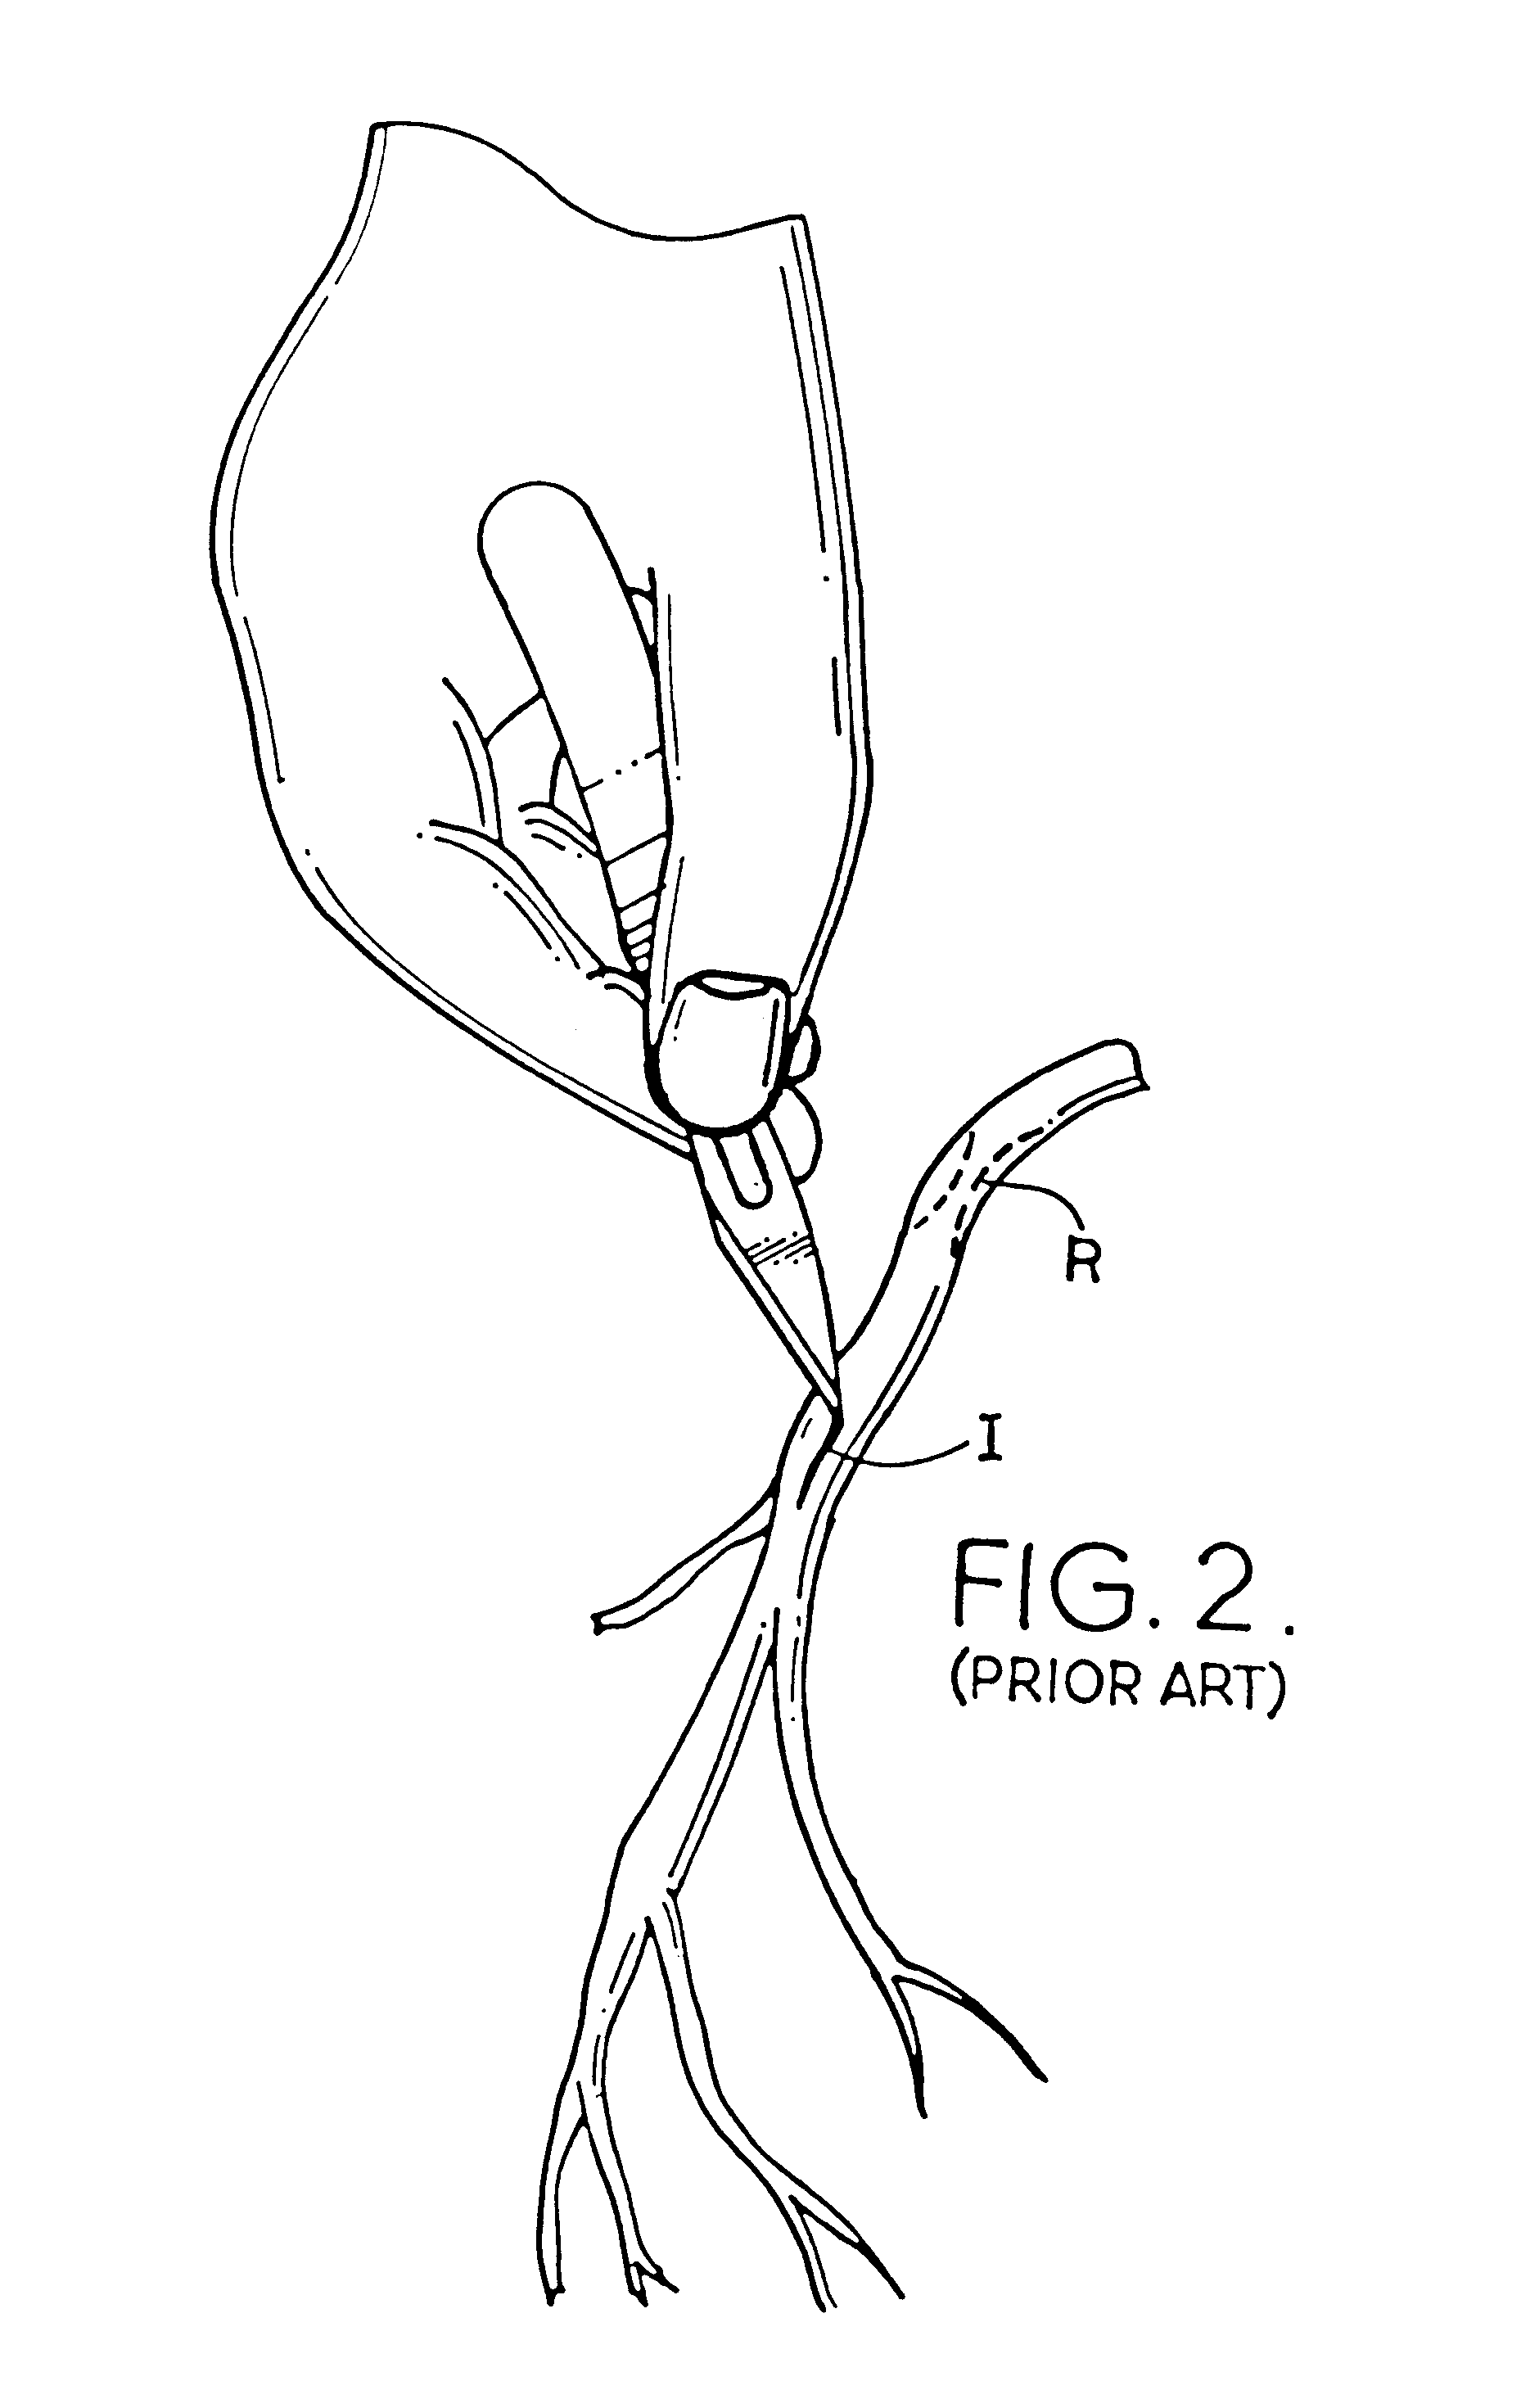 Apparatus and method for performing an anastomosis